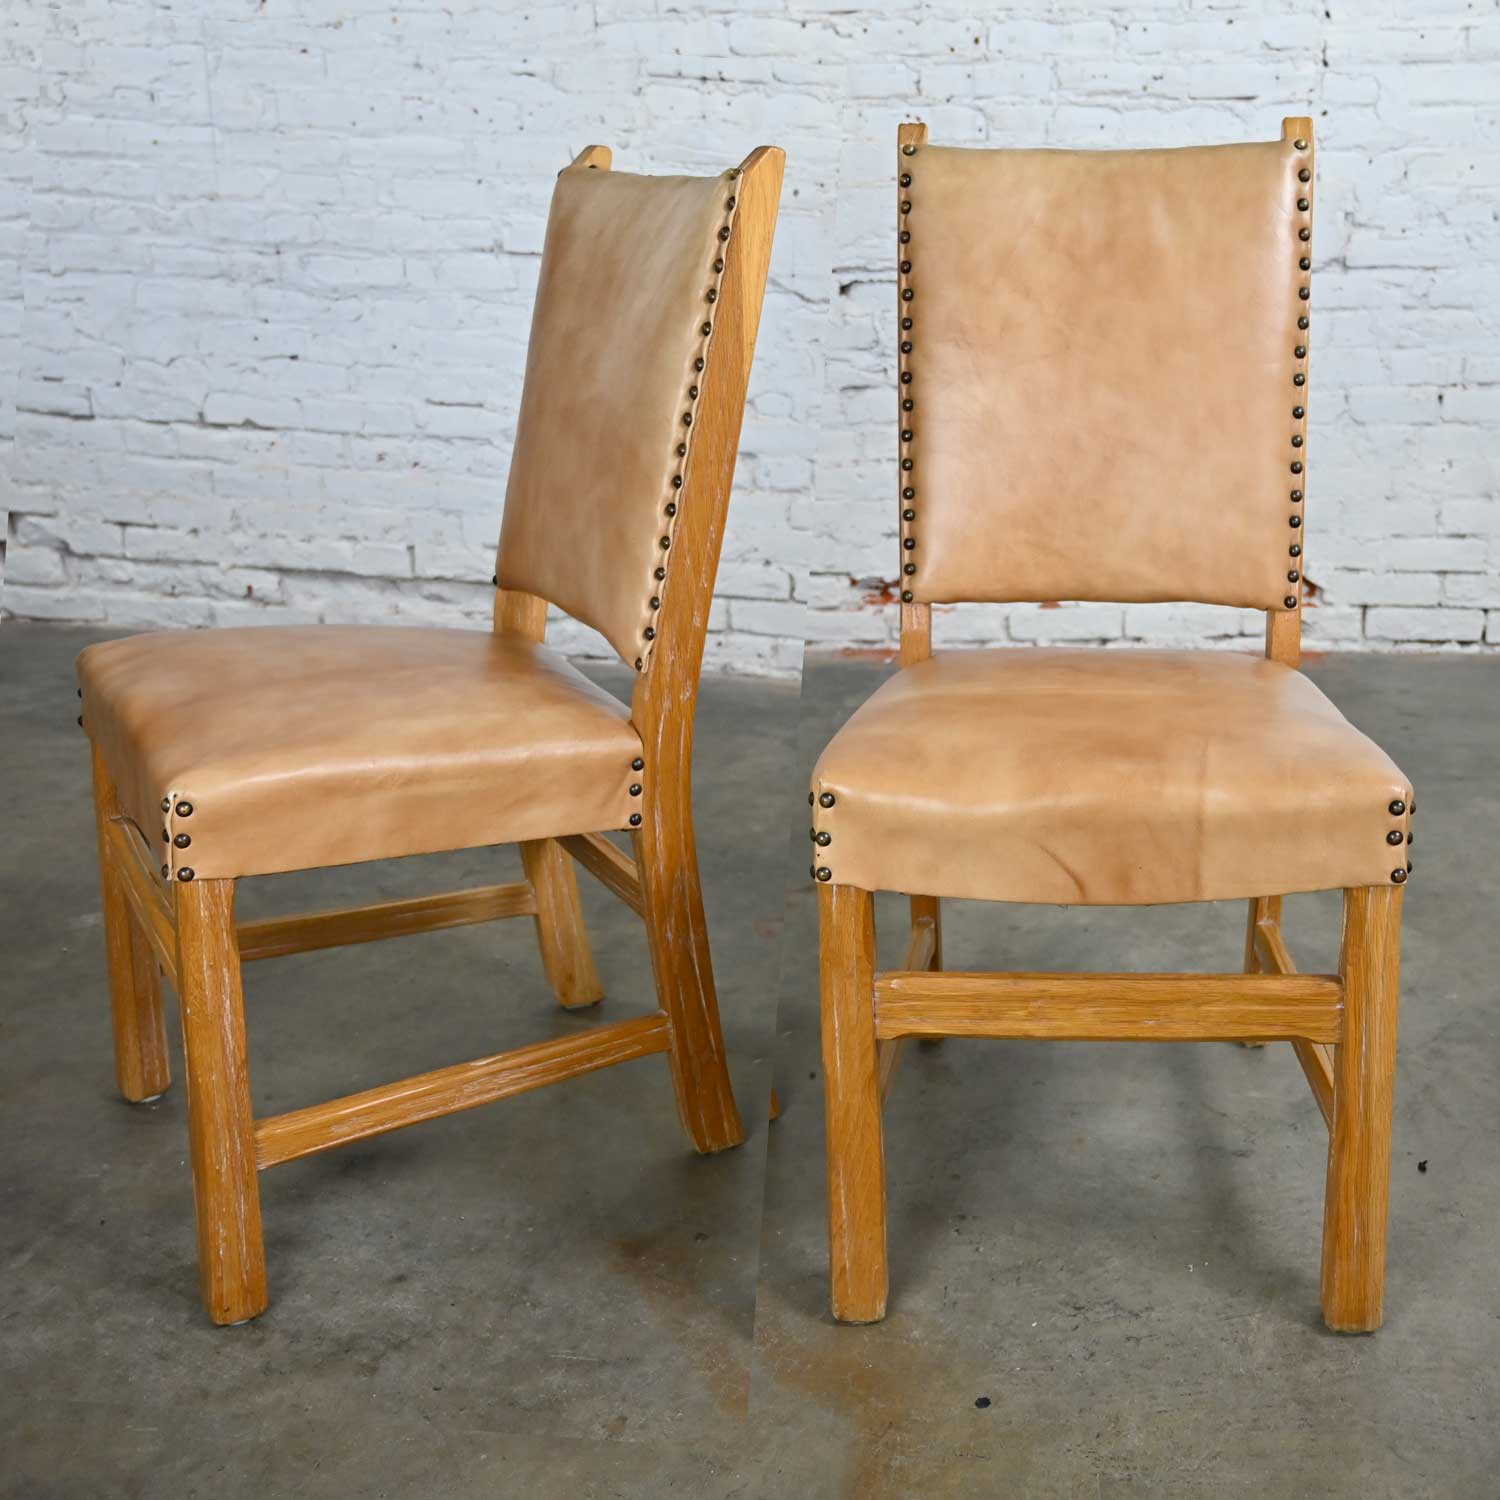 Pair of Side Chairs Beige Vinyl & Antiqued Brass Nail Head Trim Attributed to A. Brandt Ranch Oak